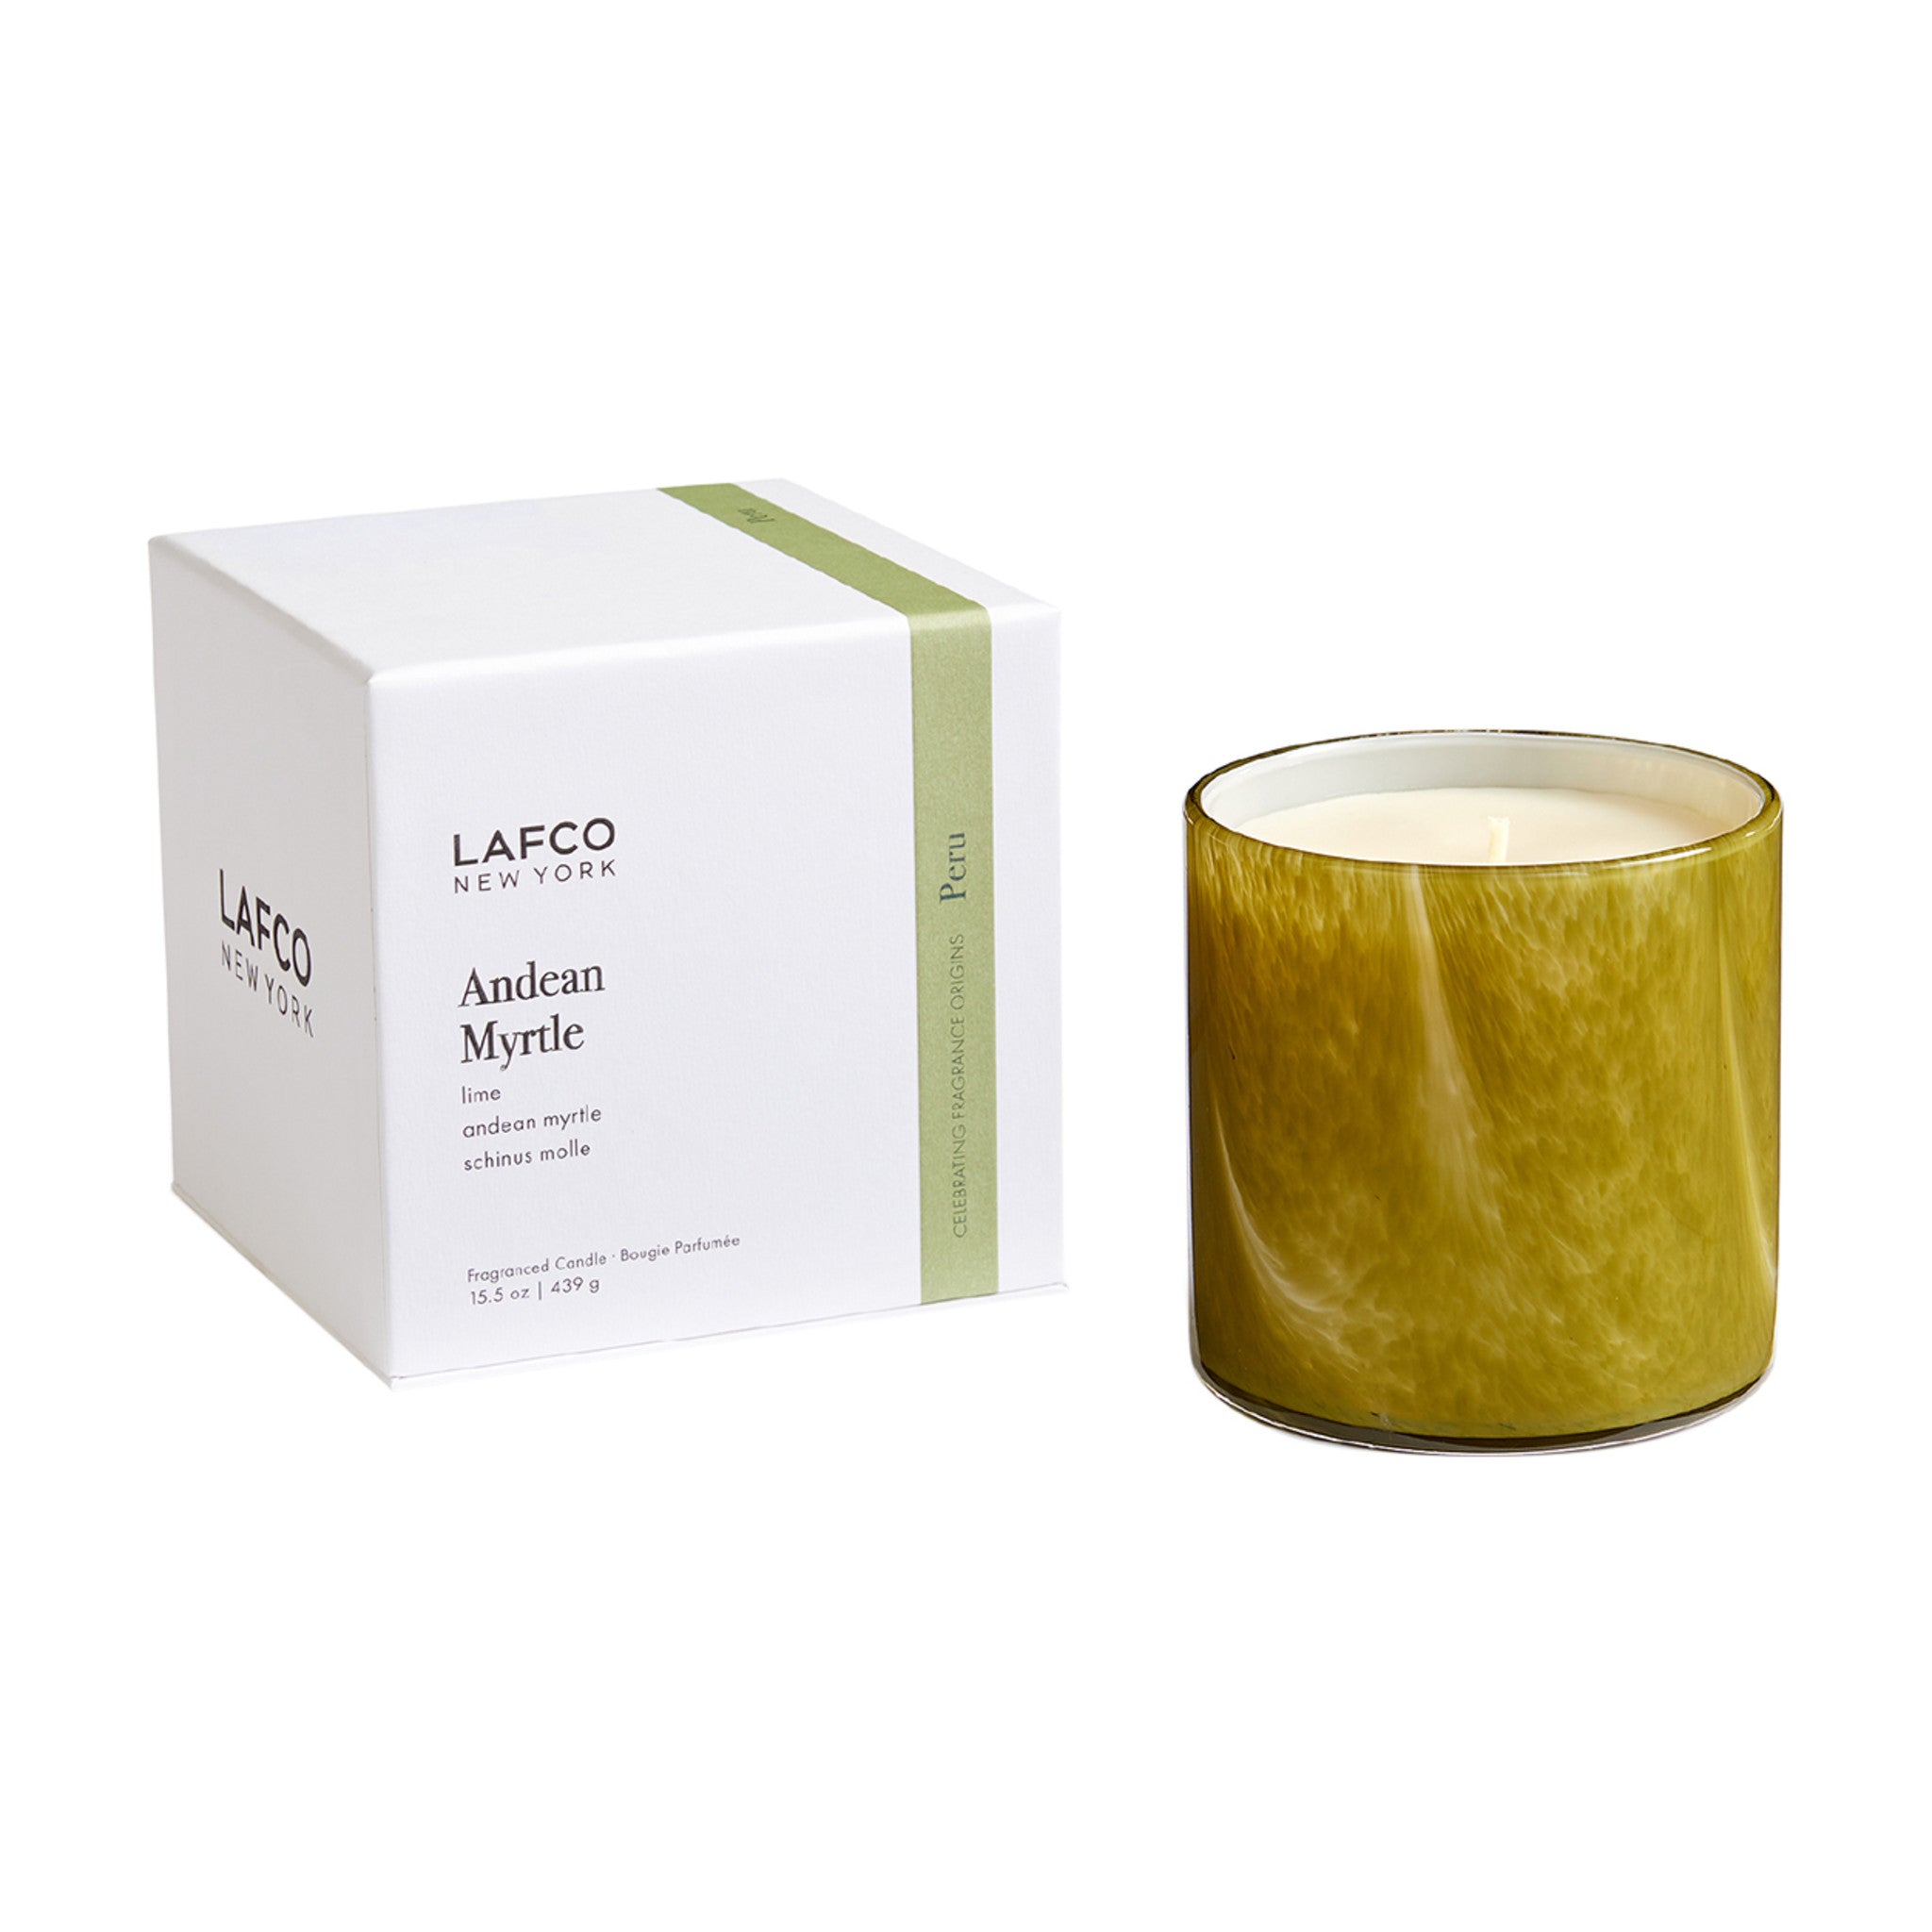 Lafco Andean Myrtle Signature Candle main image.